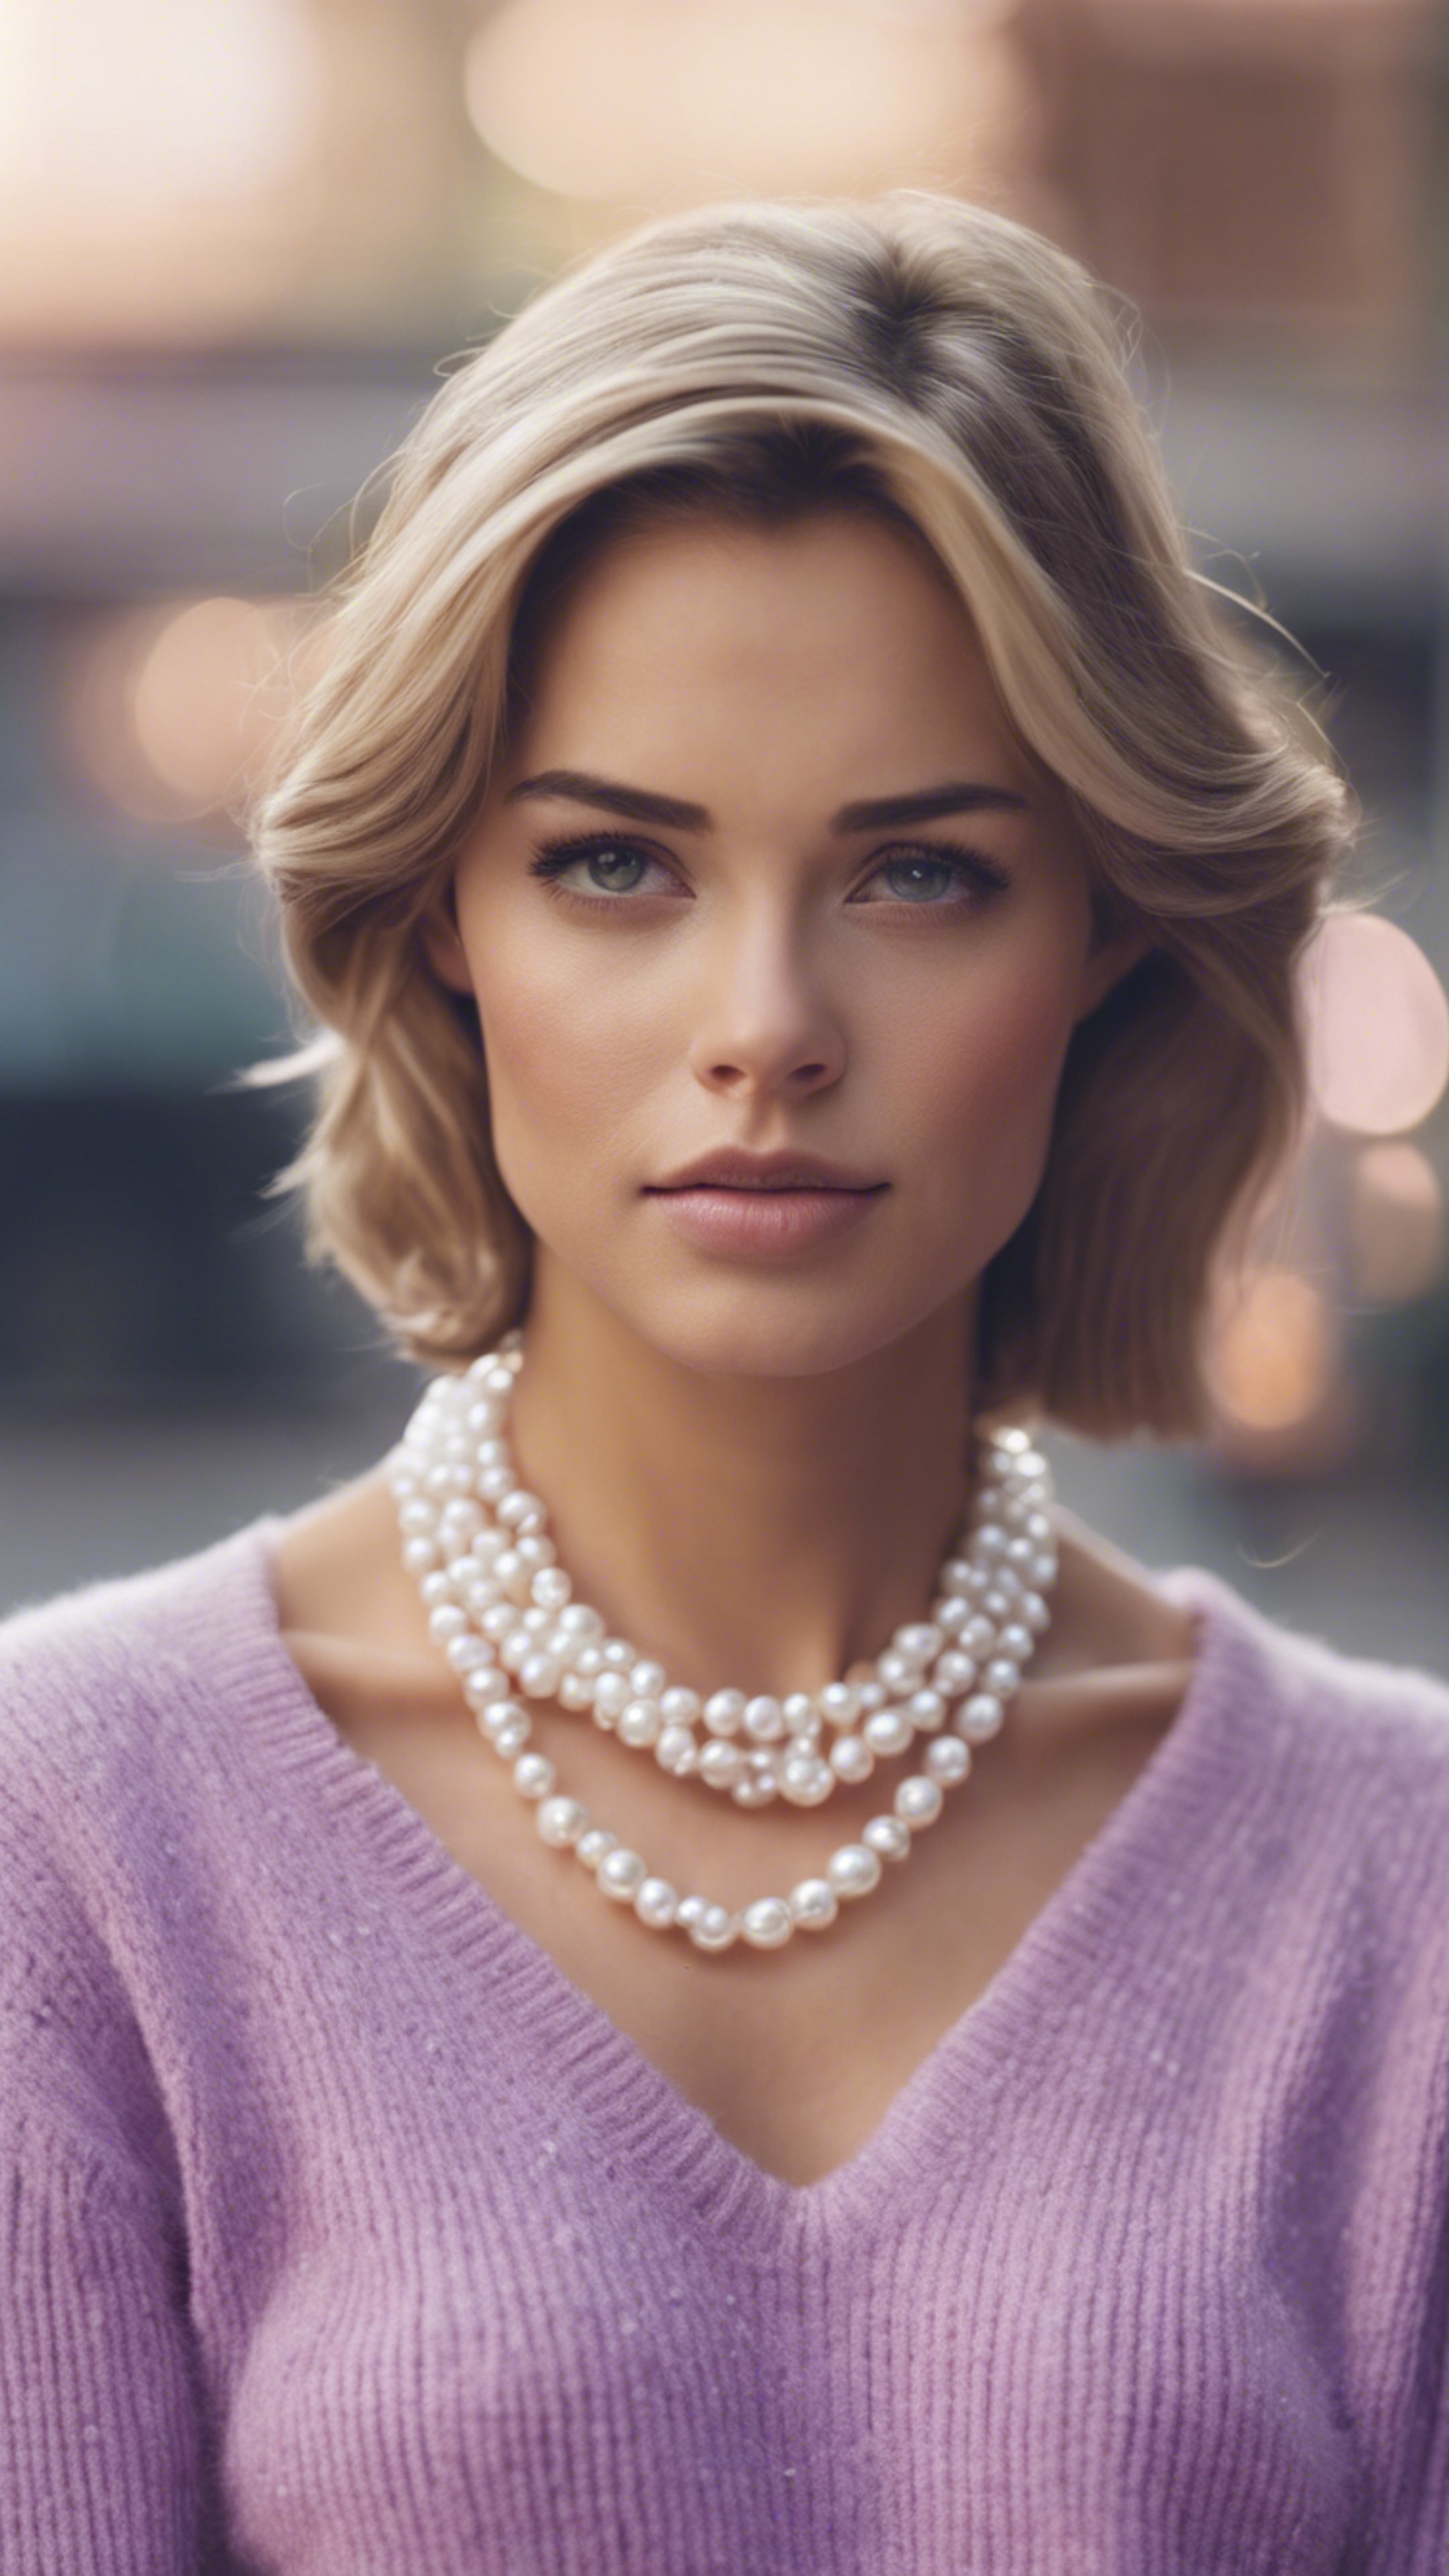 A stylish preppy woman wearing a pastel purple cashmere sweater and pearl necklace. 벽지[eff5c75e56ed424daf90]